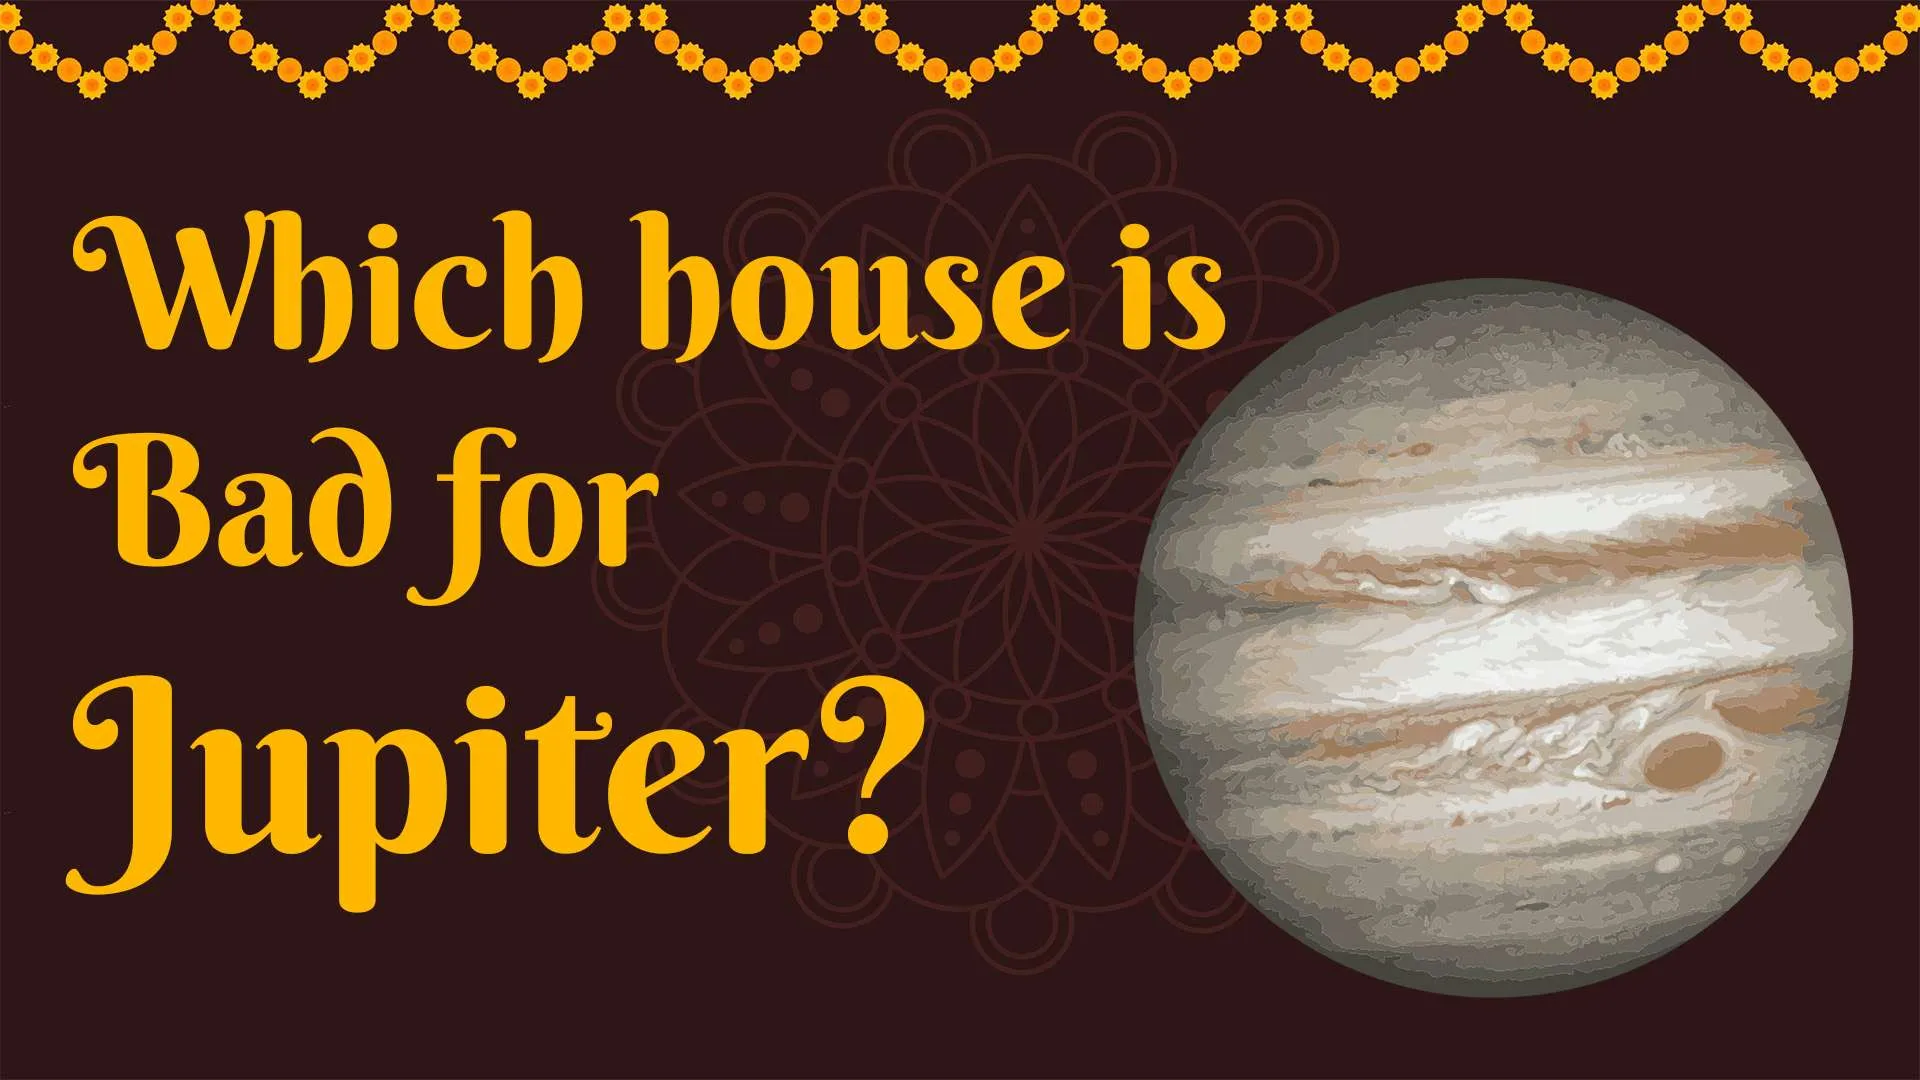 Which houses are bad for Jupiter?